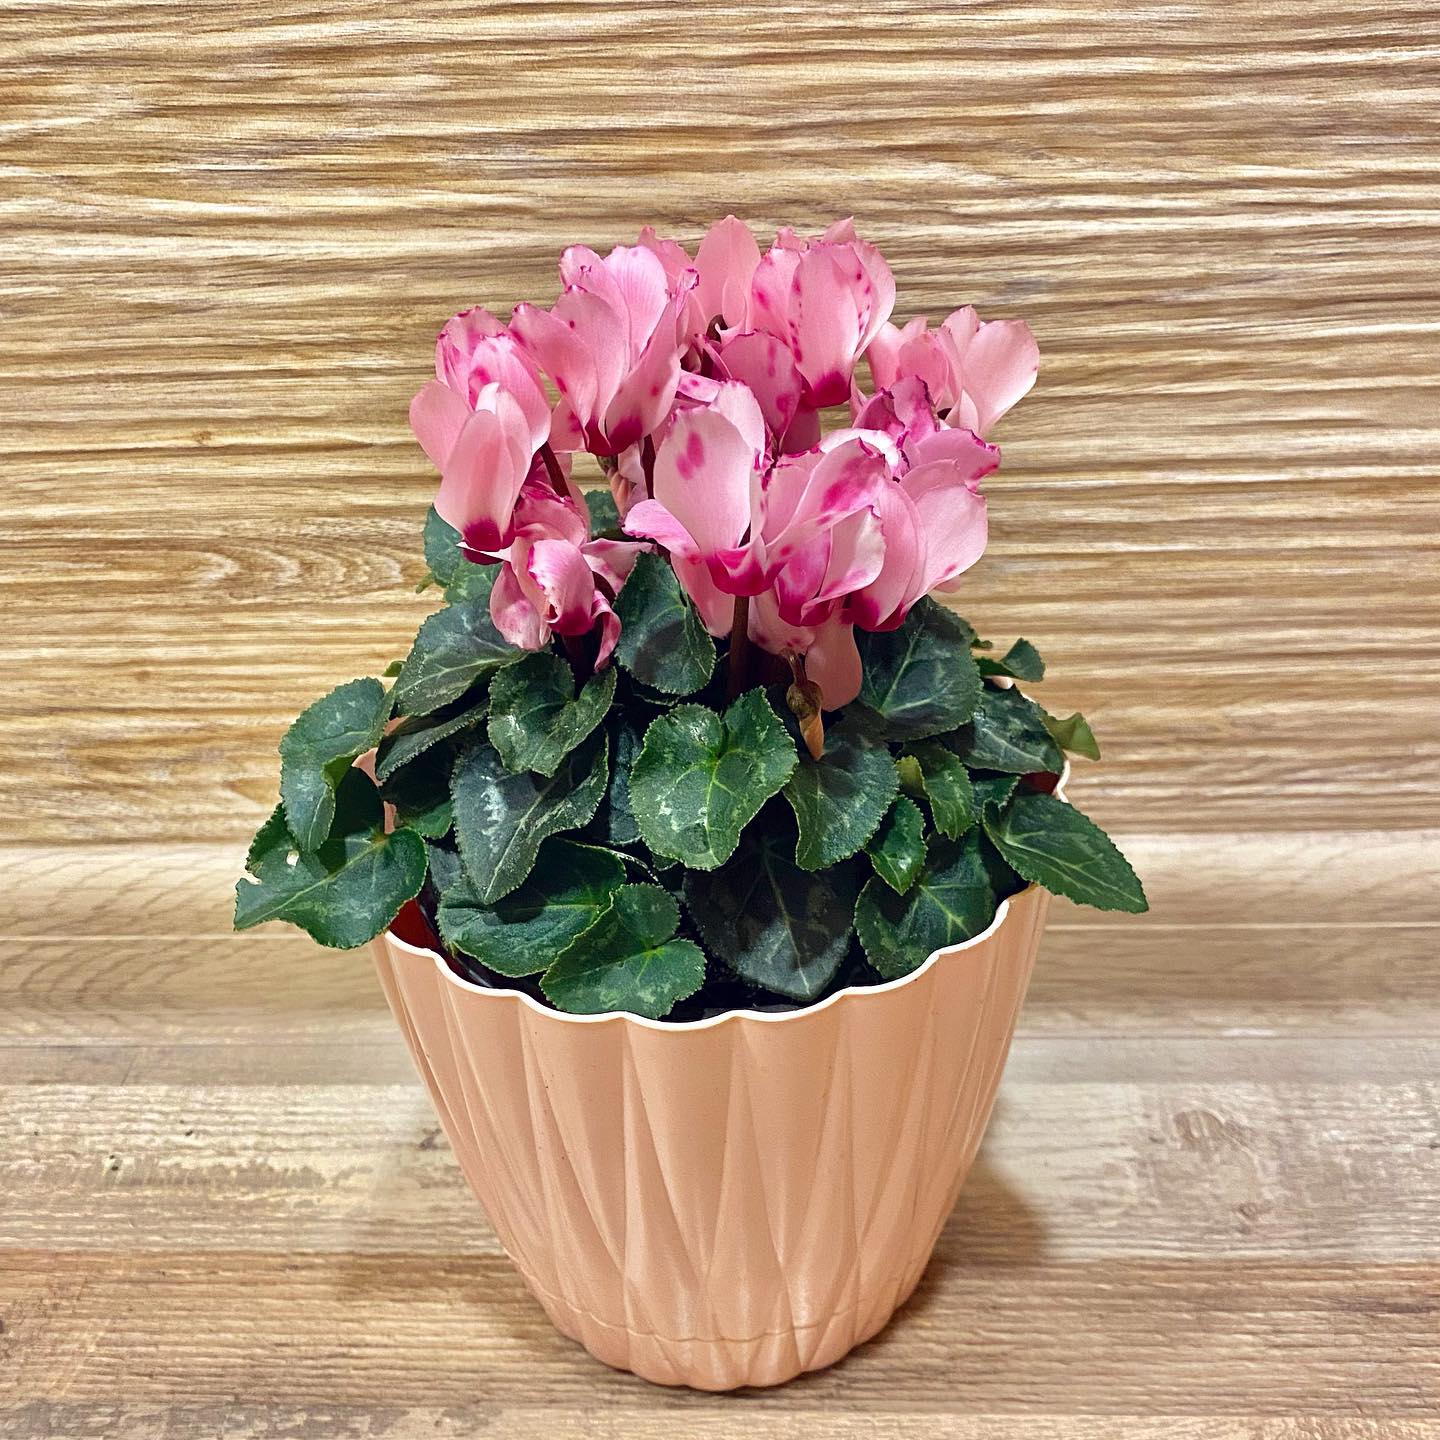 Top 10 Interesting Facts About Cyclamen